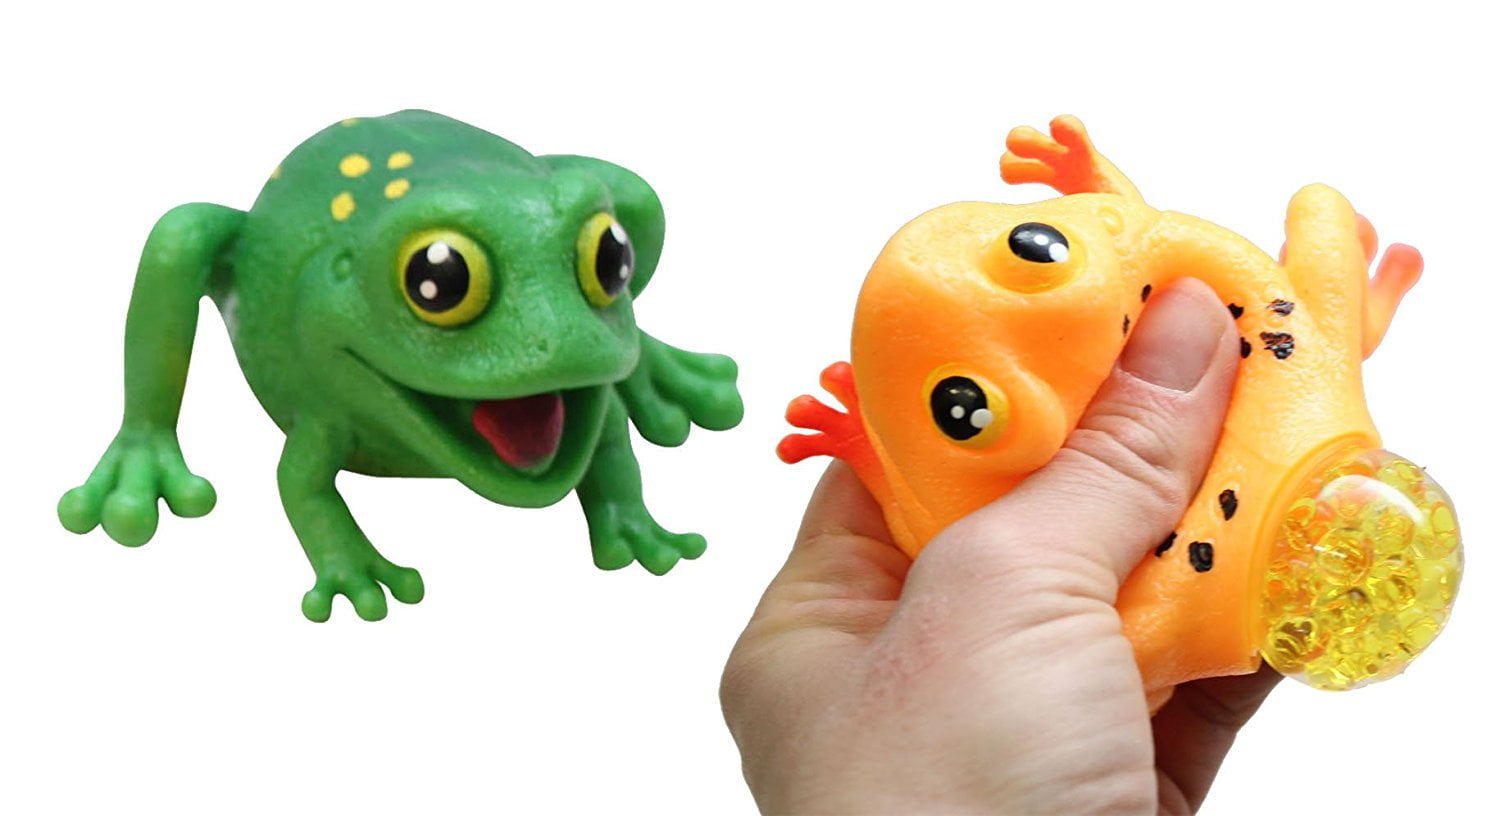 Details about   2 Squeeze Frog Stress Ball Sensory Therapy Toy Party Favor Prize Gift 